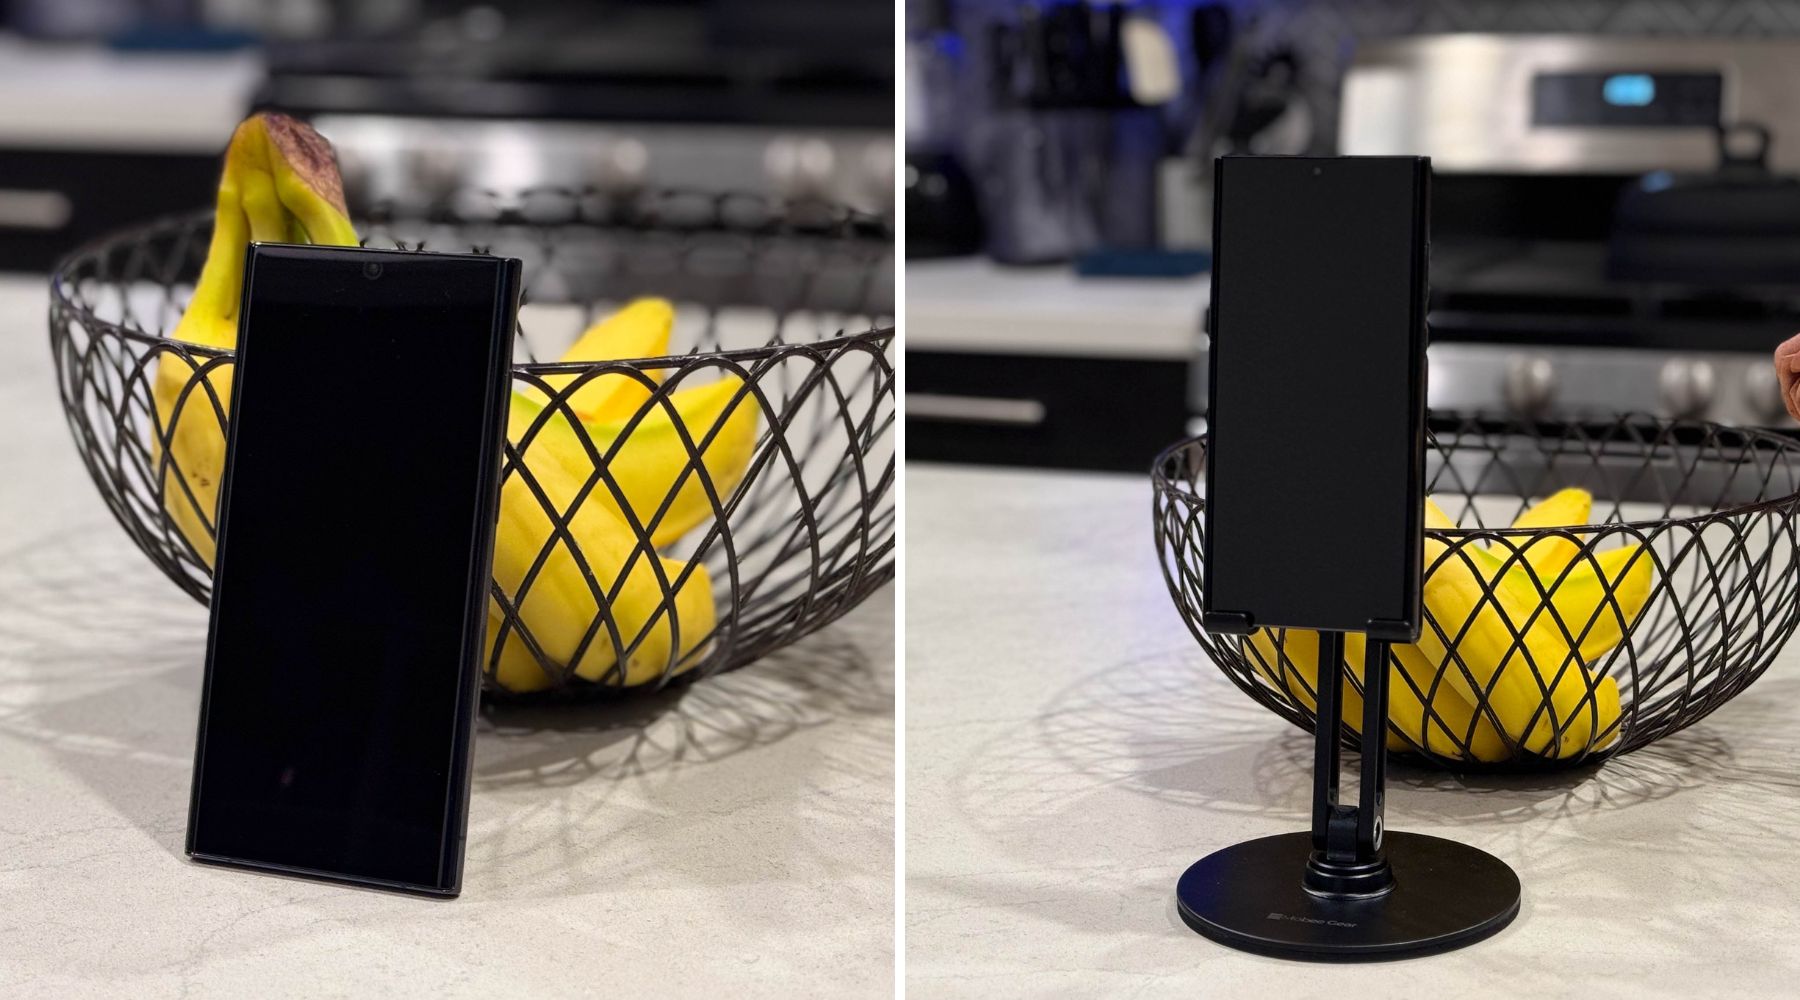 Before image: Awkwardly propped phone on a fruit basket on a kitchen countertop. After image: Phone held securely in a collapsible stand on a kitchen countertop for hands-free convenience.